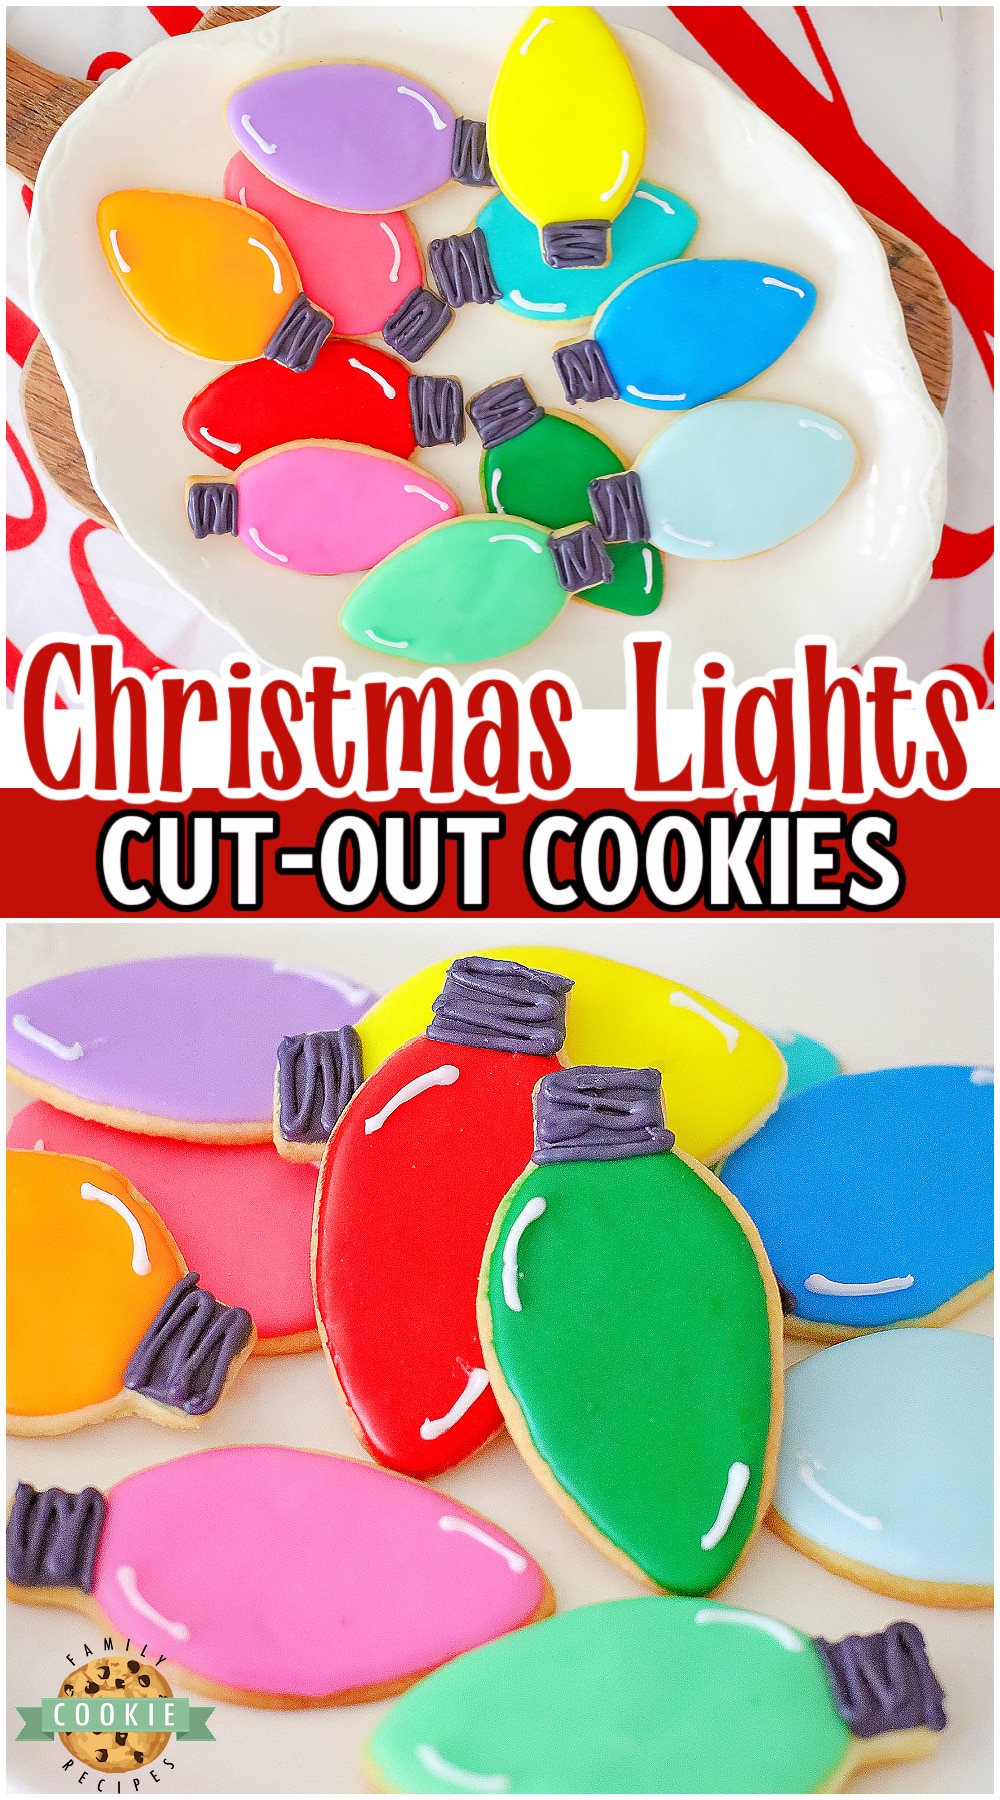 Festive Christmas light cut-out cookies are bright & colorful cookies perfect for Christmas trays! Simple butter cookies cut out, baked & frosted to look just like sparkly holiday lights on the tree! 